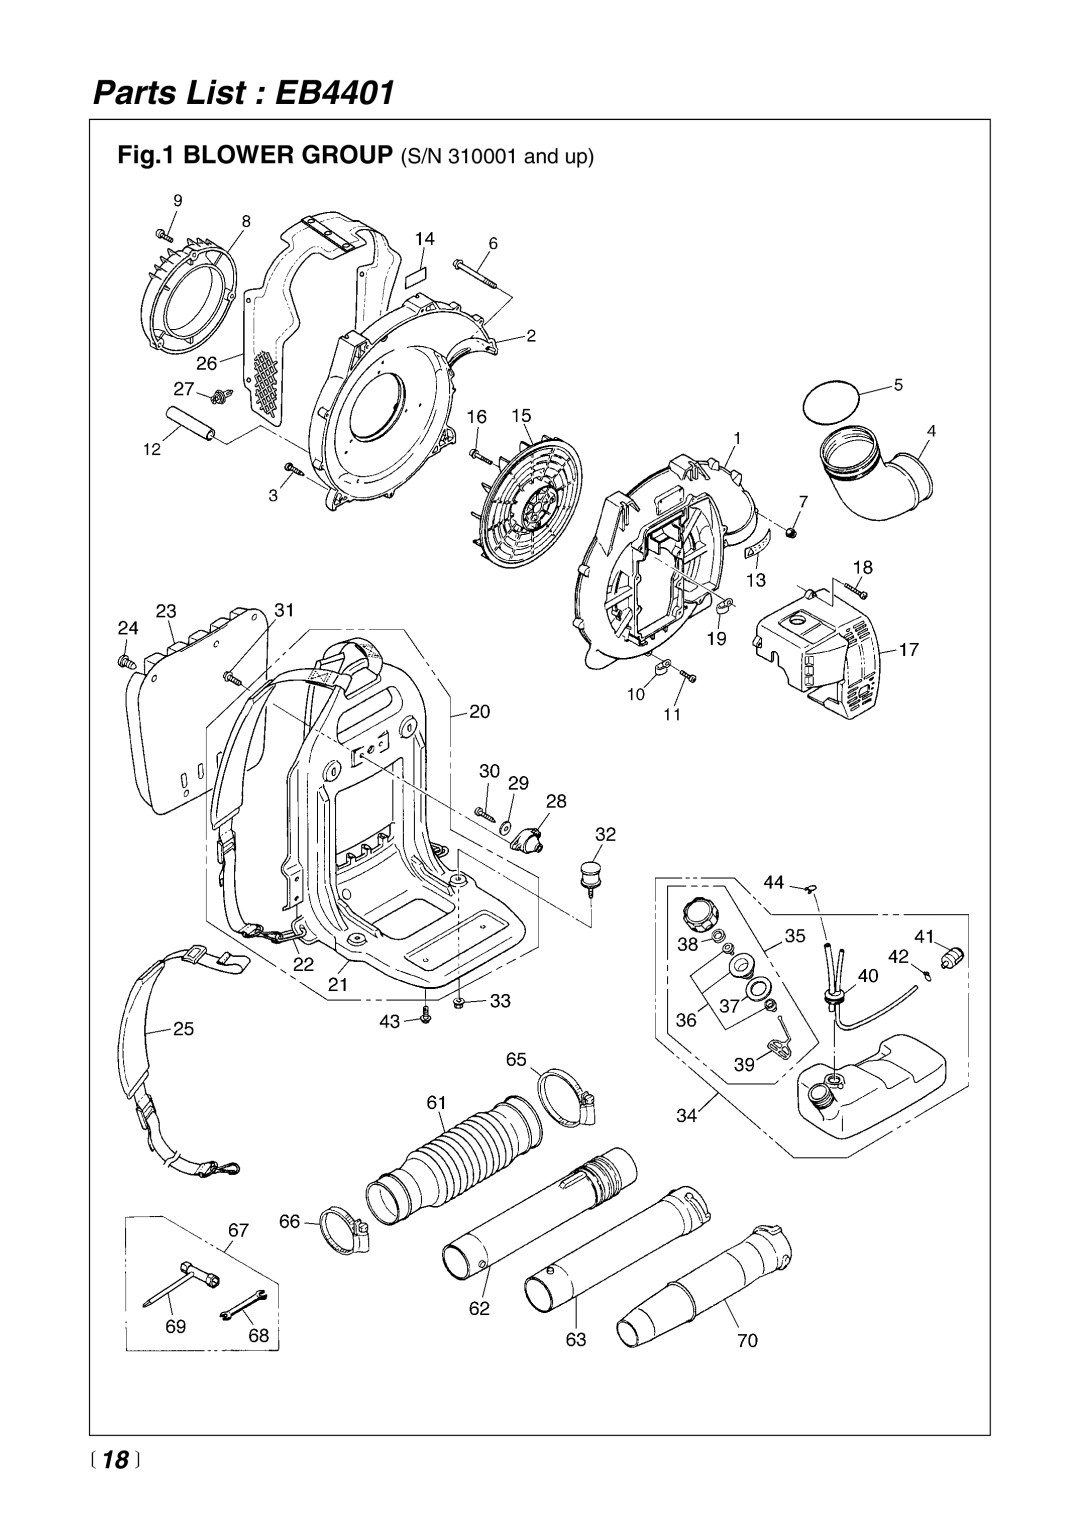 RedMax manual Parts List EB4401, BLOWER GROUP S/N 310001 and up, 18  